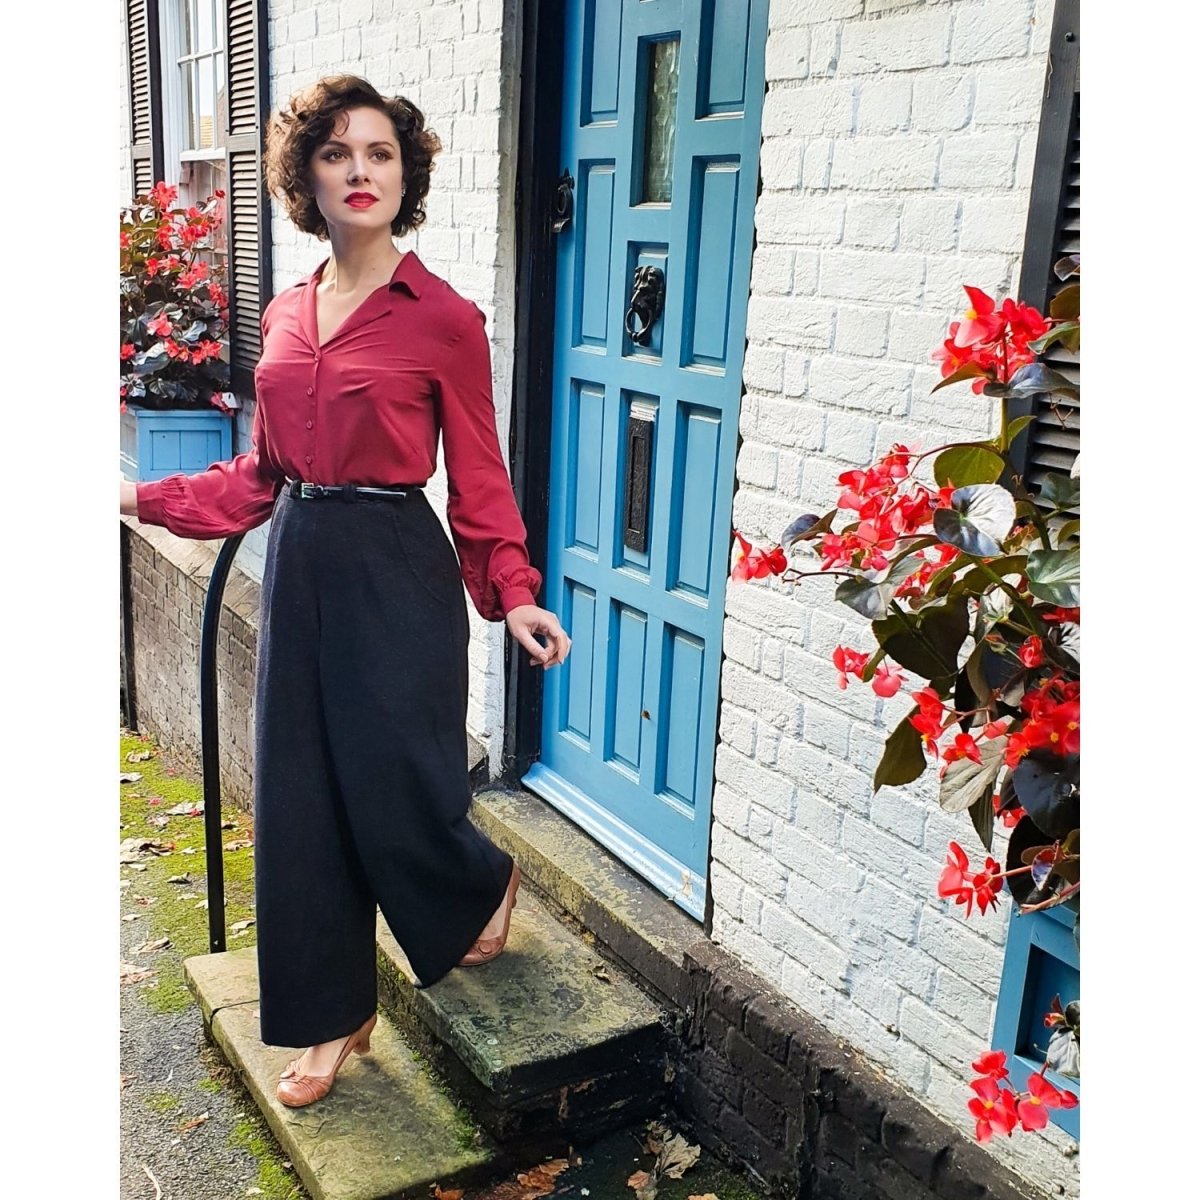 Vintage Inspired High Waisted Wide Leg Trousers in Teal - 1930s & 40s style